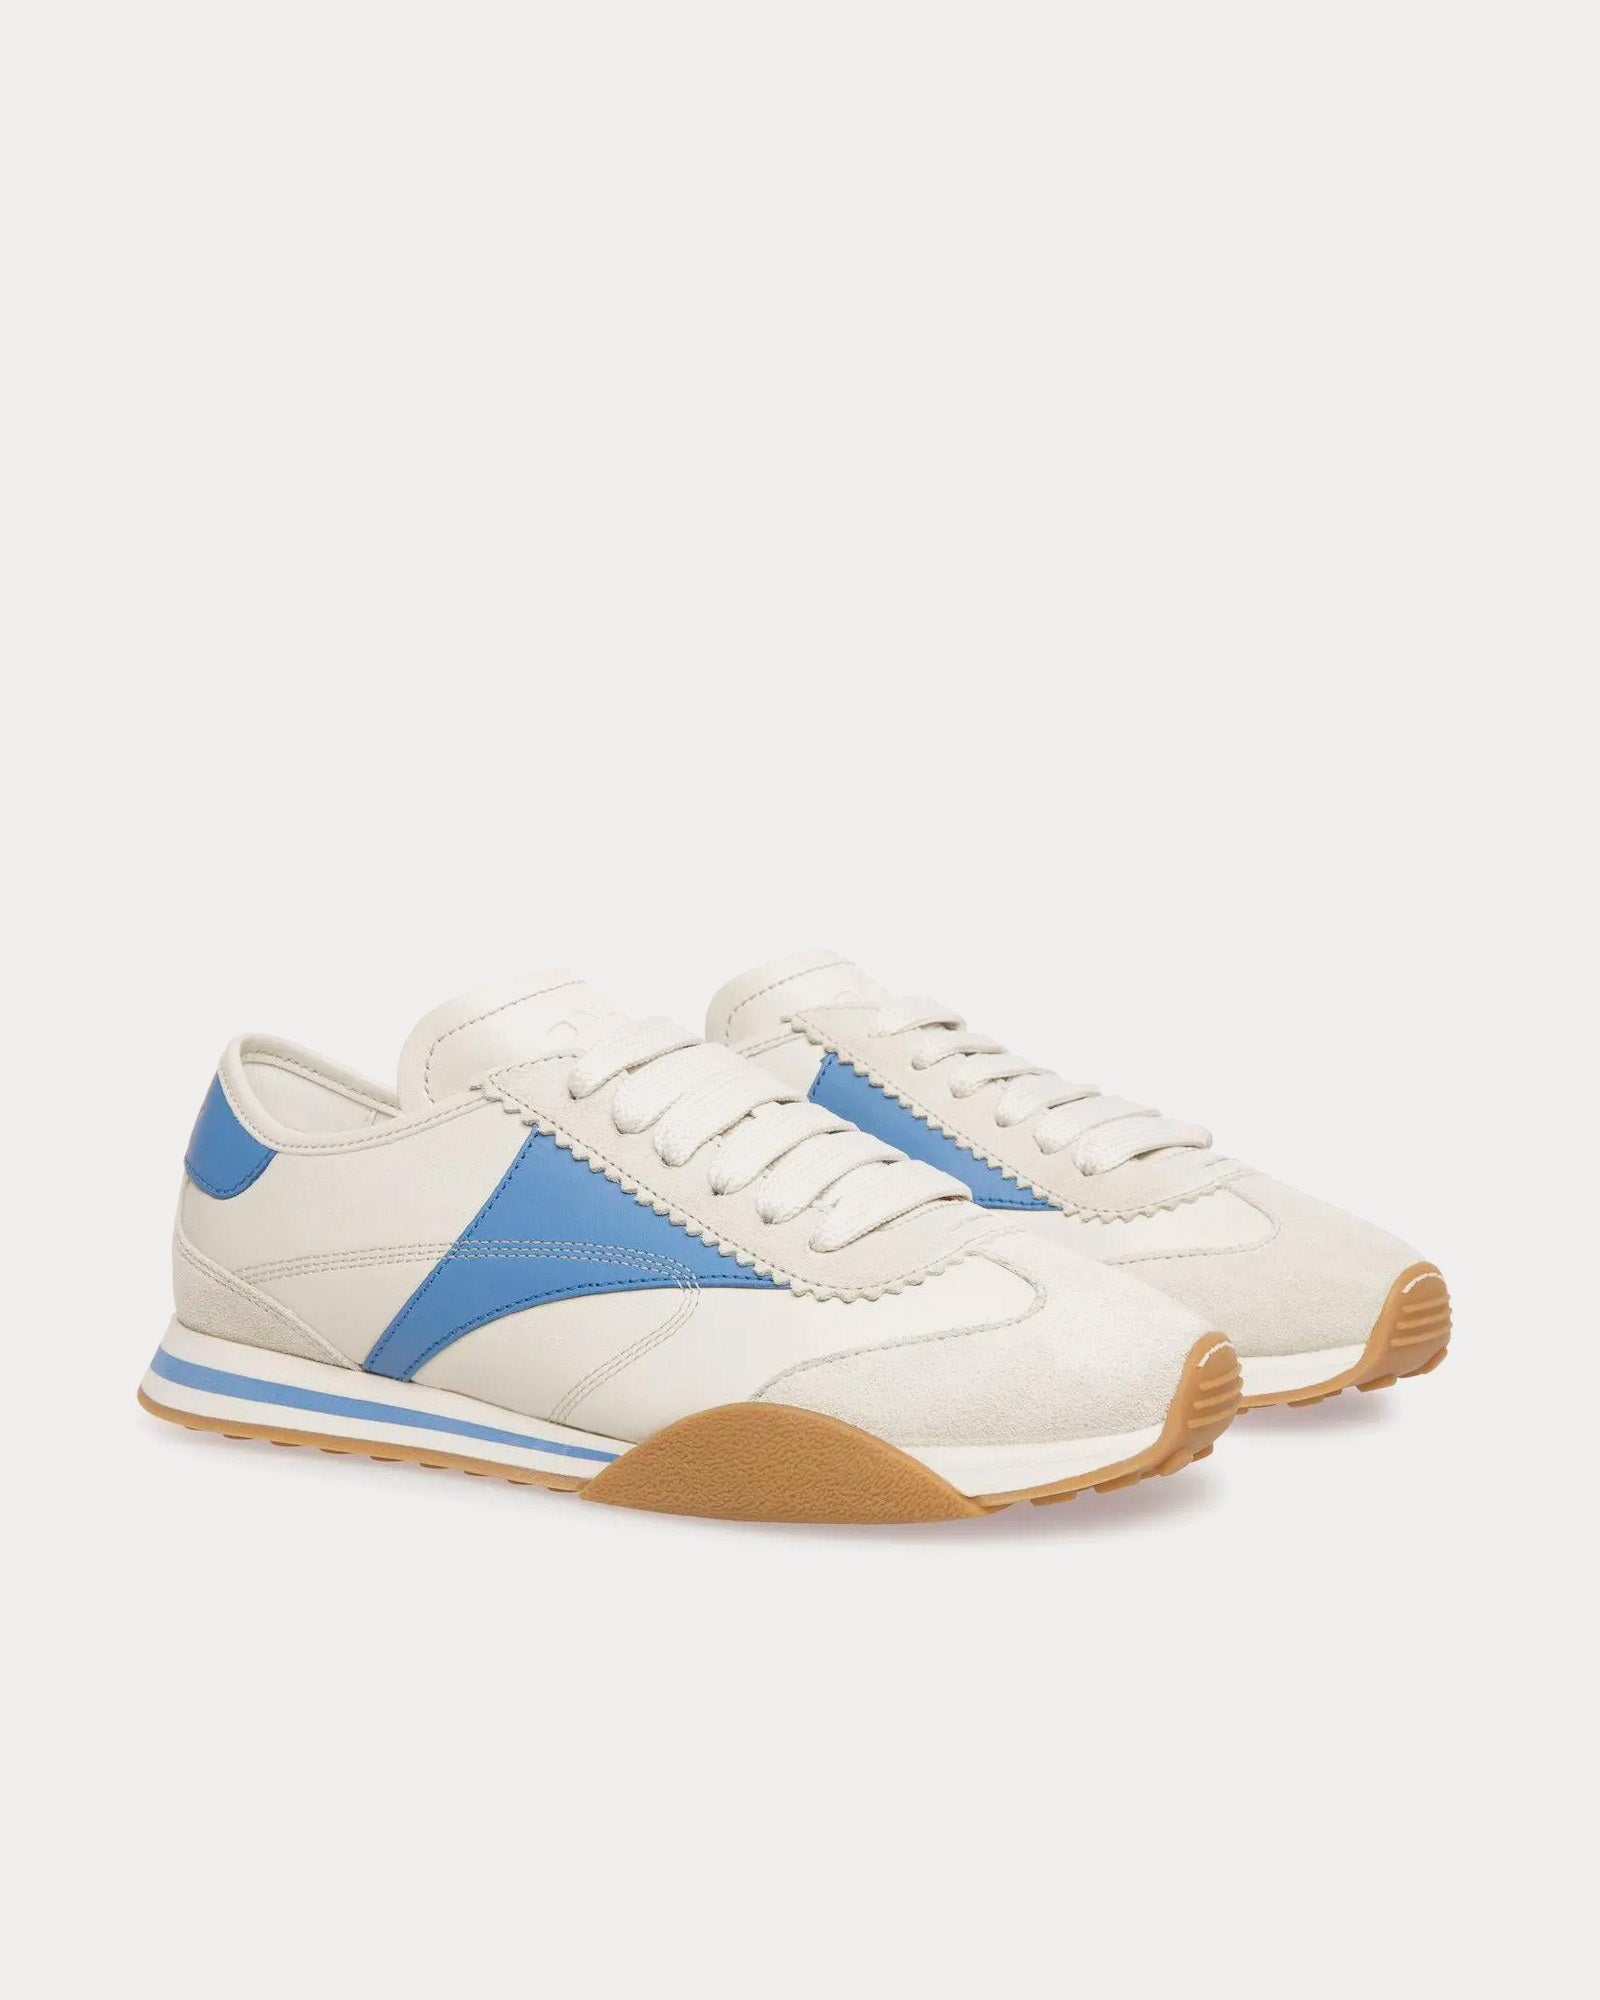 Bally - Sussex Leather Dusty White / Blue Low Top Sneakers